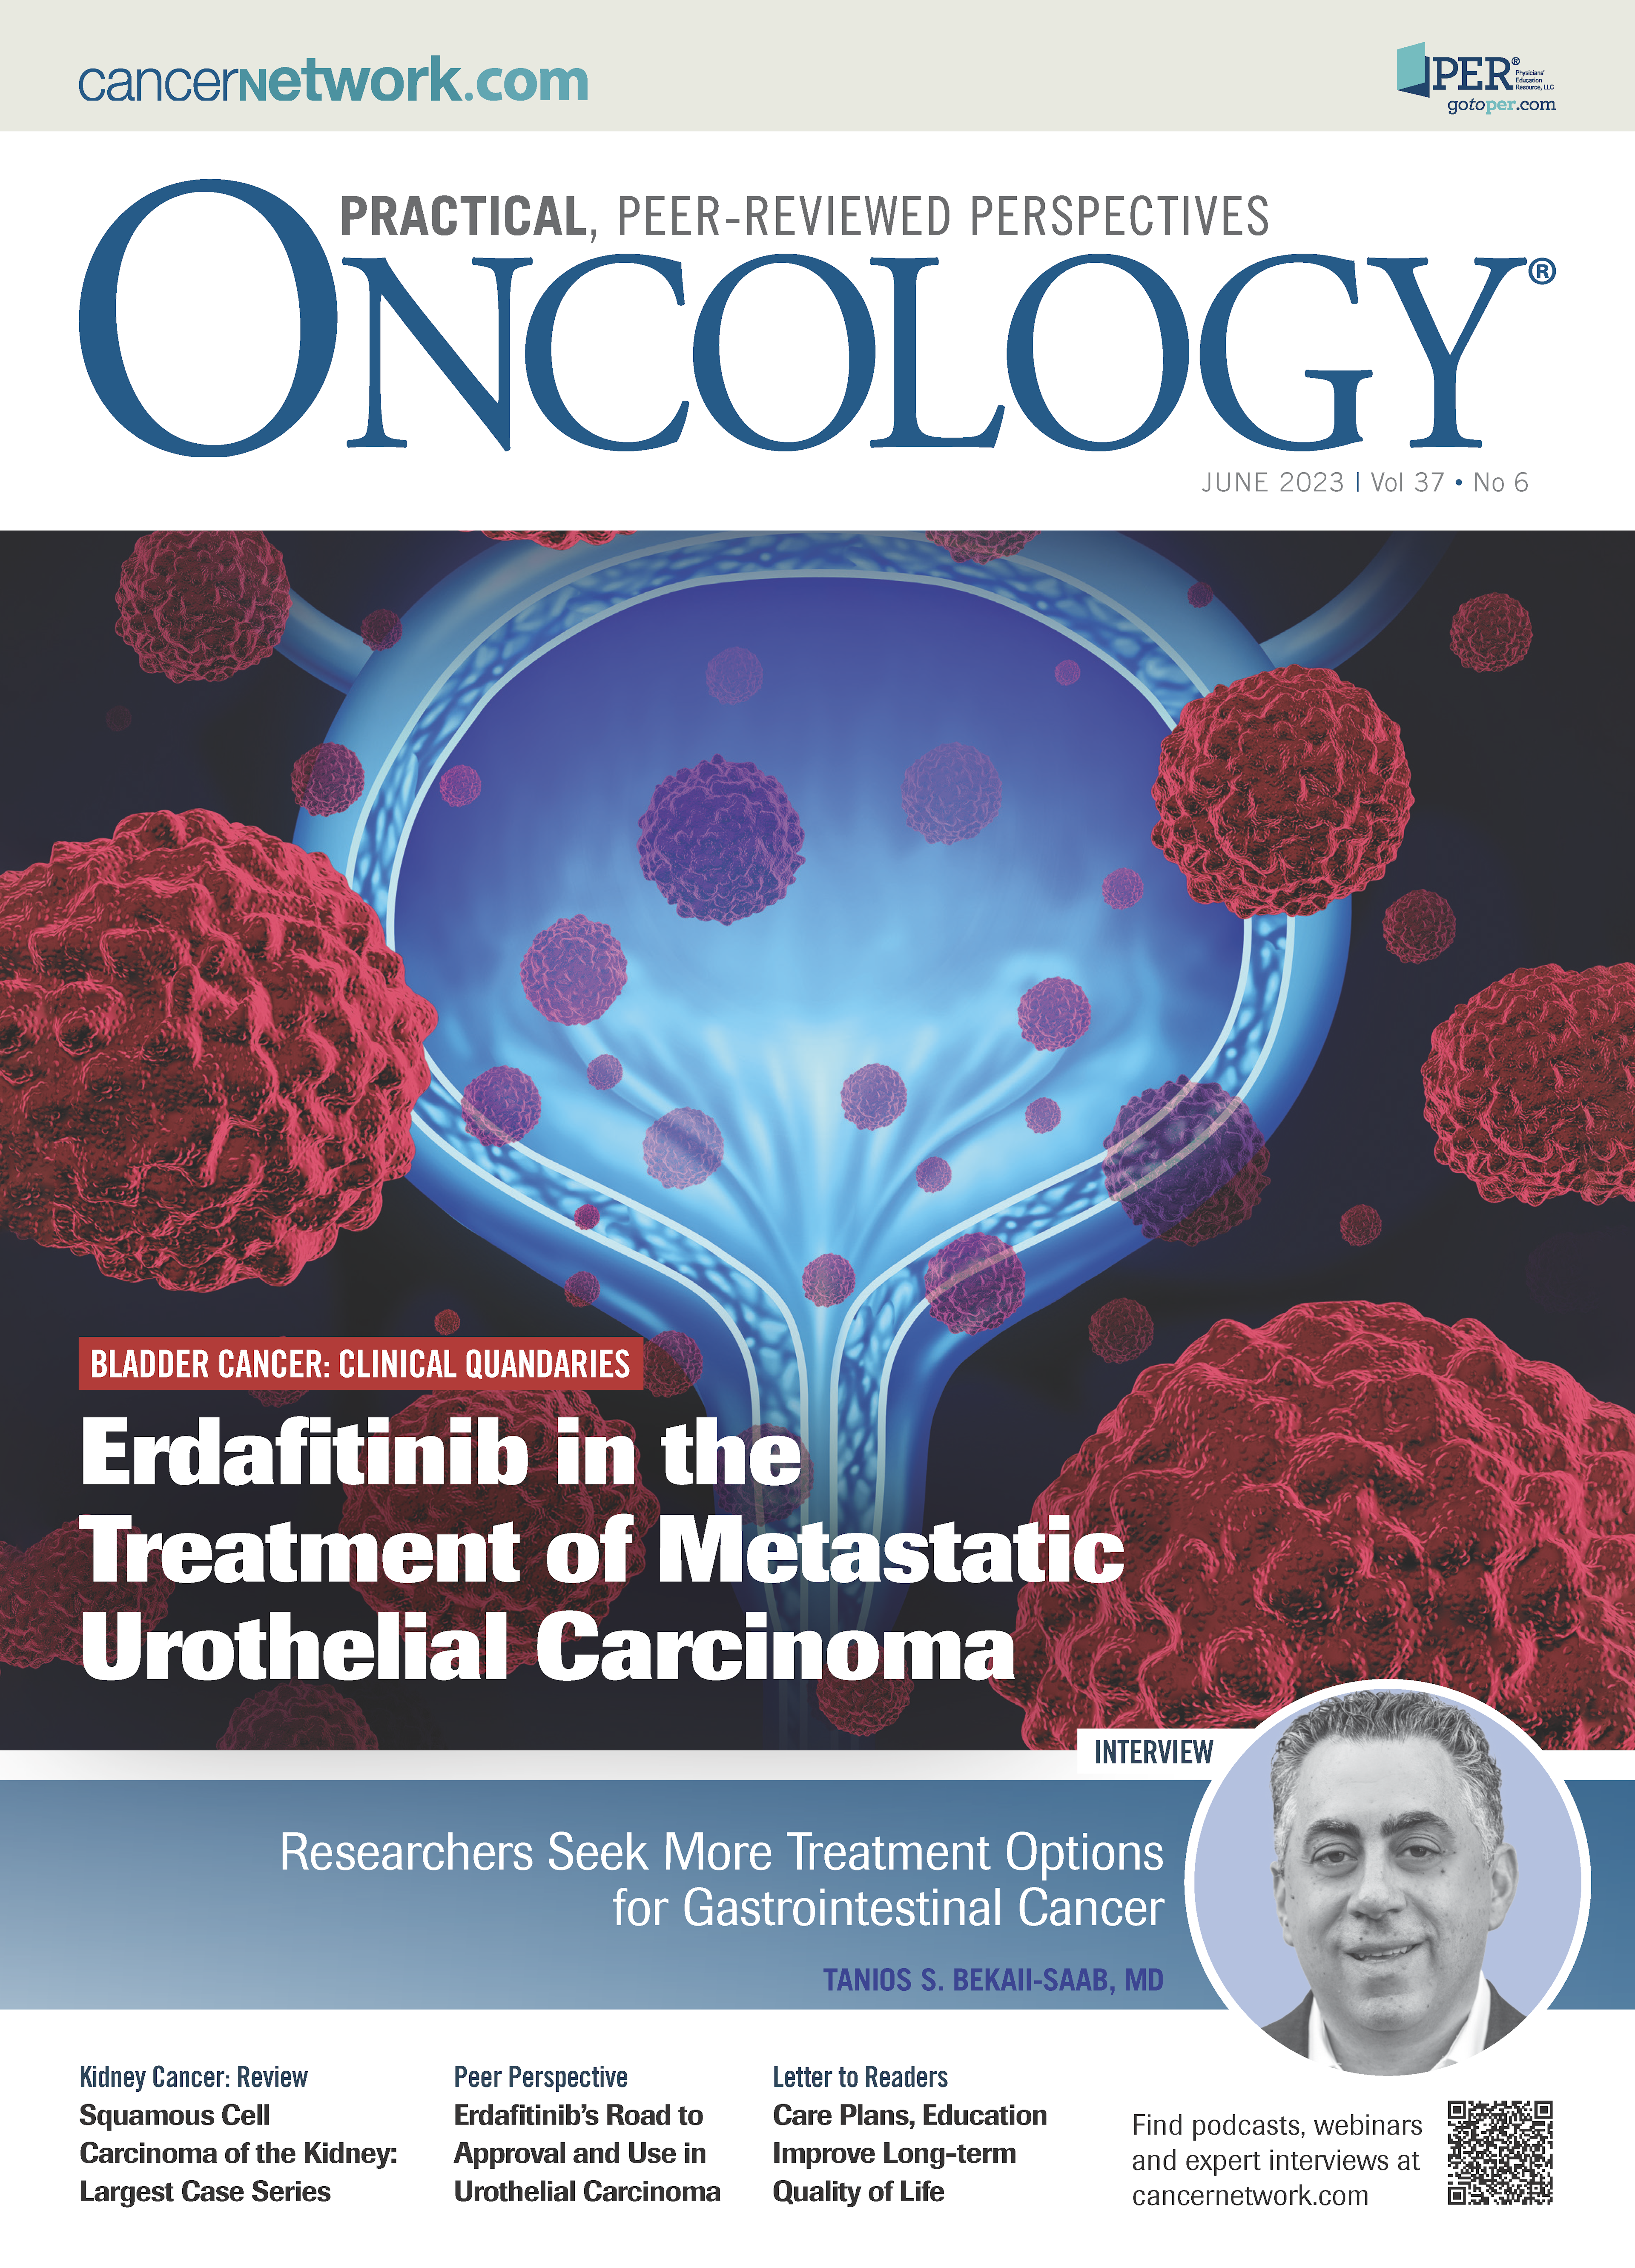 ONCOLOGY Vol 37, Issue 6